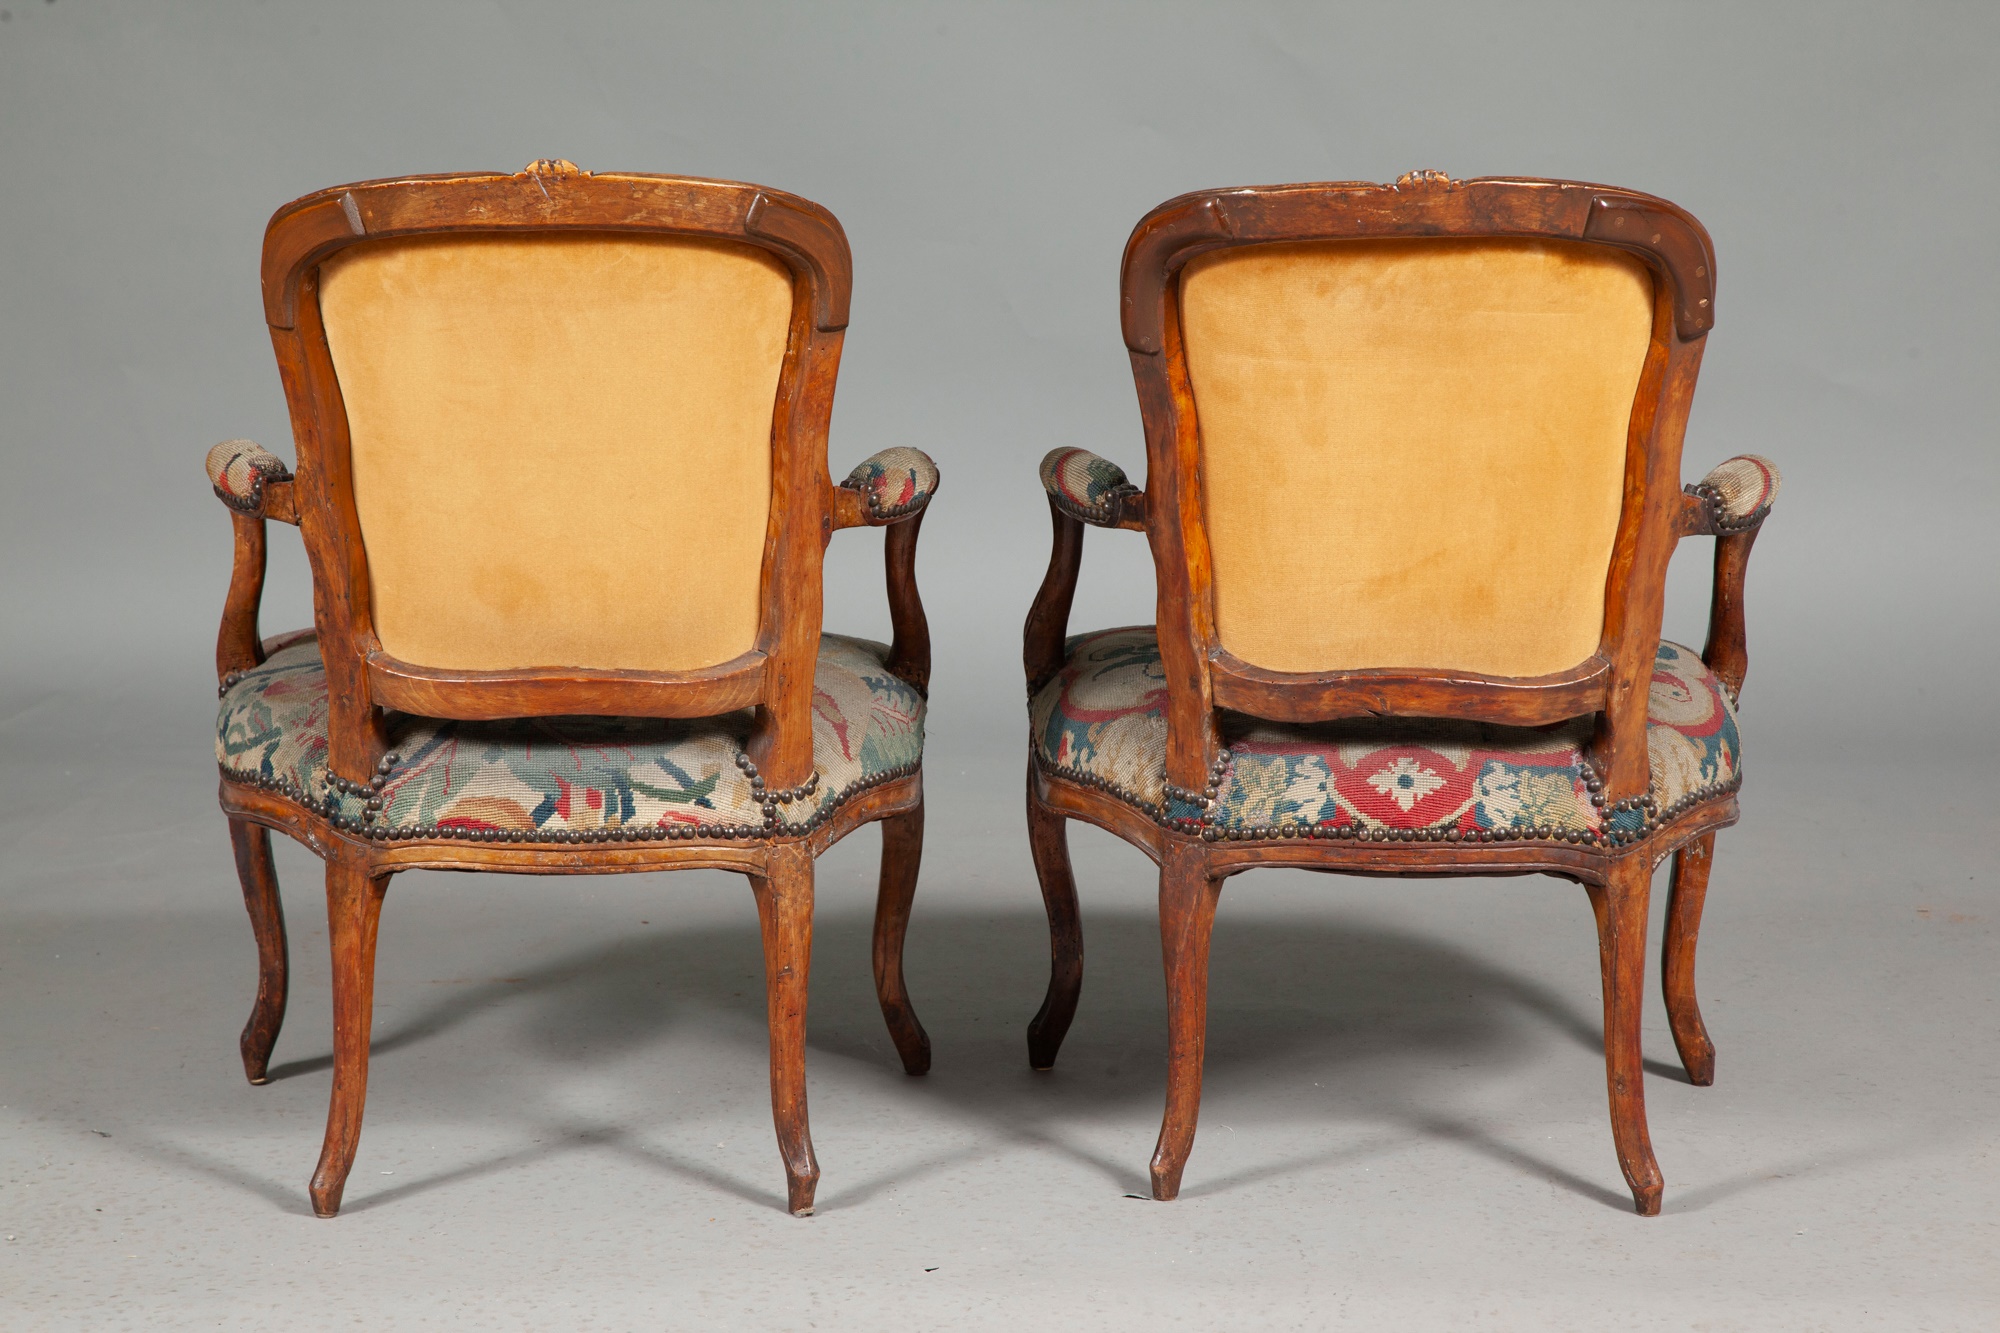 Assembled Group of Louis XV Needlework-Upholstered Beechwood Fauteuils - Image 8 of 8